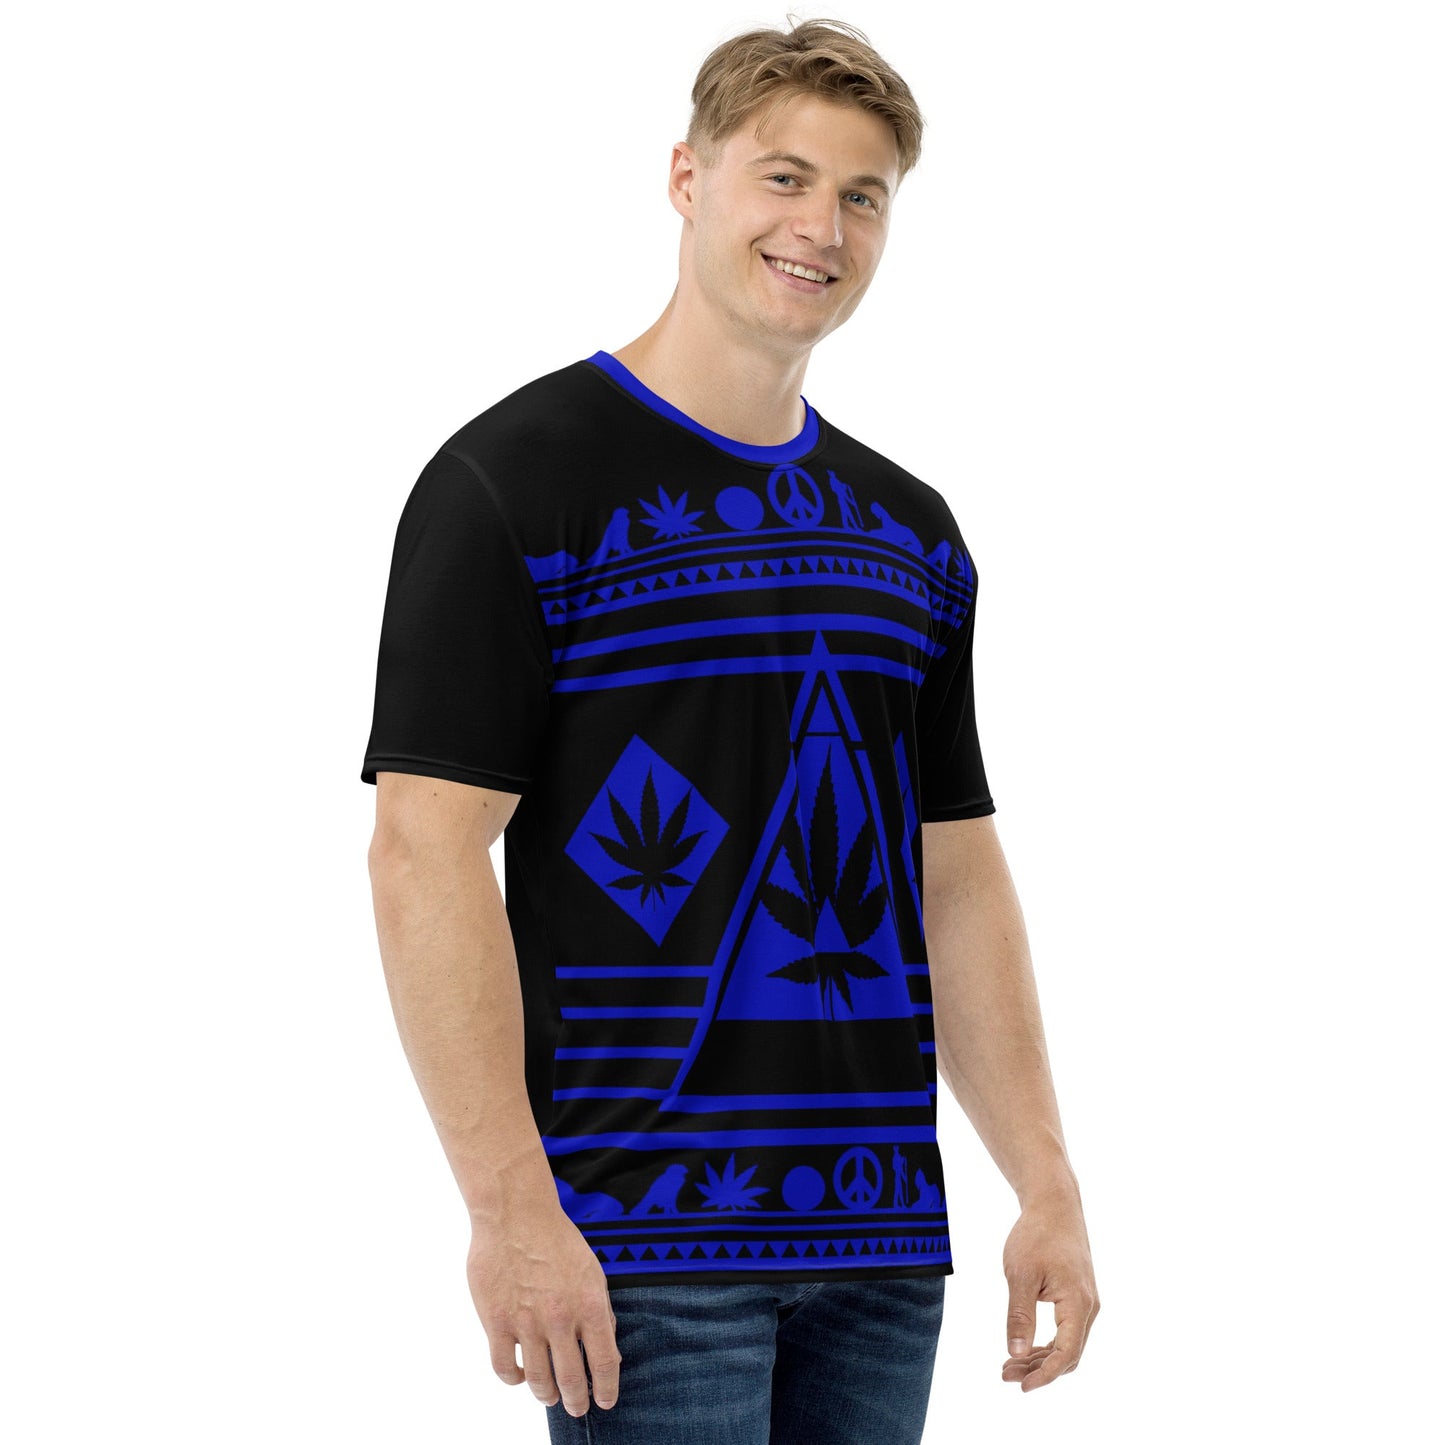 blue and black graphic tee shirt